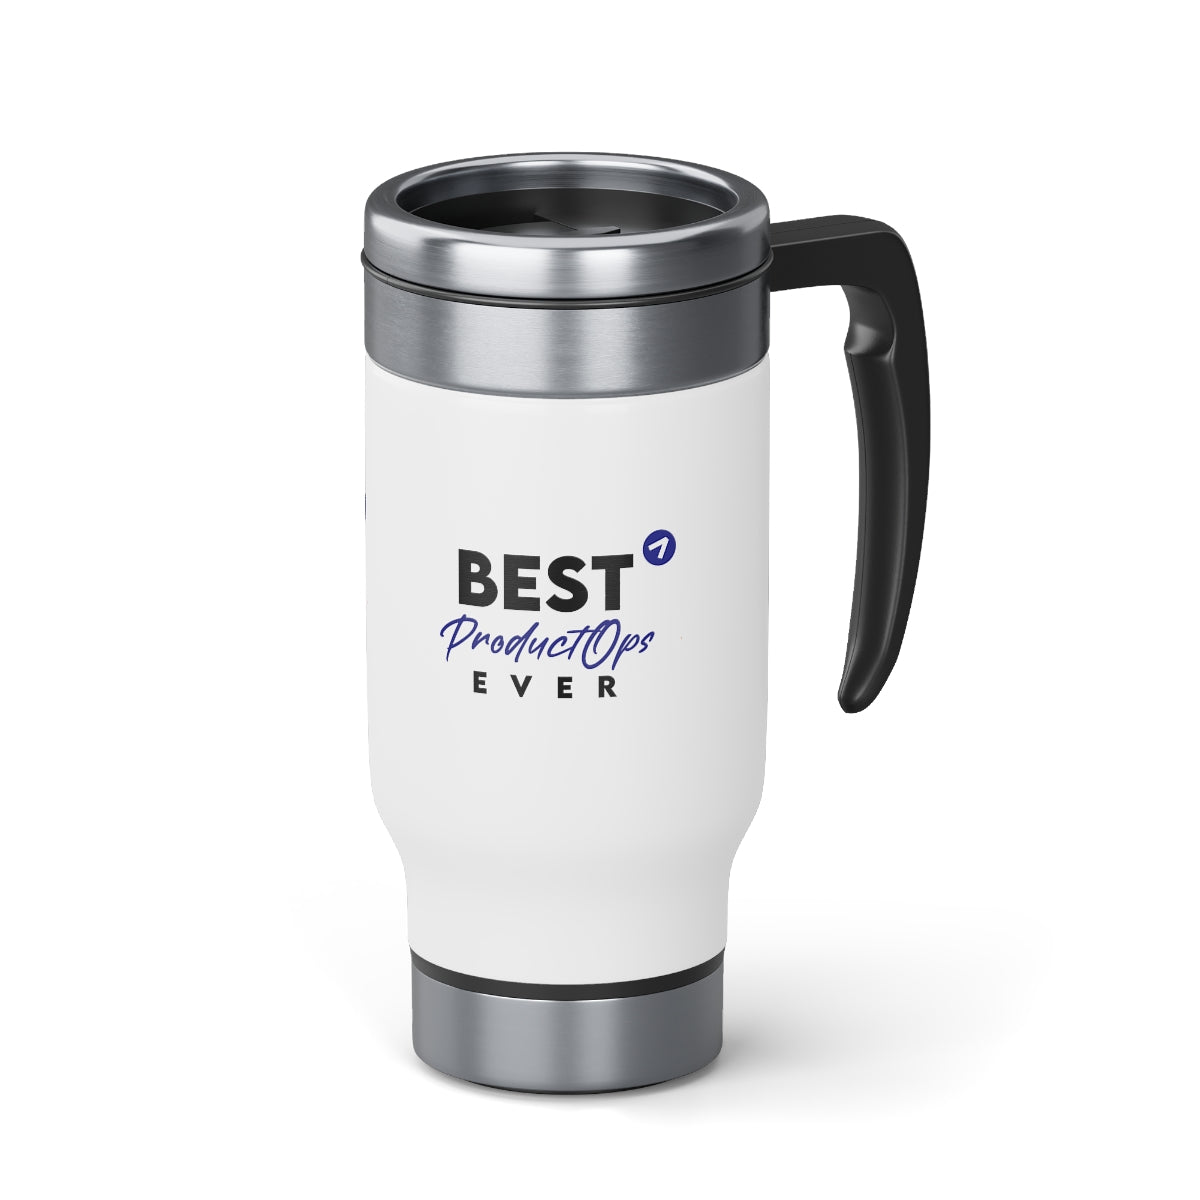 Best Product Operations ever - Blue - Stainless Steel Travel Mug with Handle, 14oz